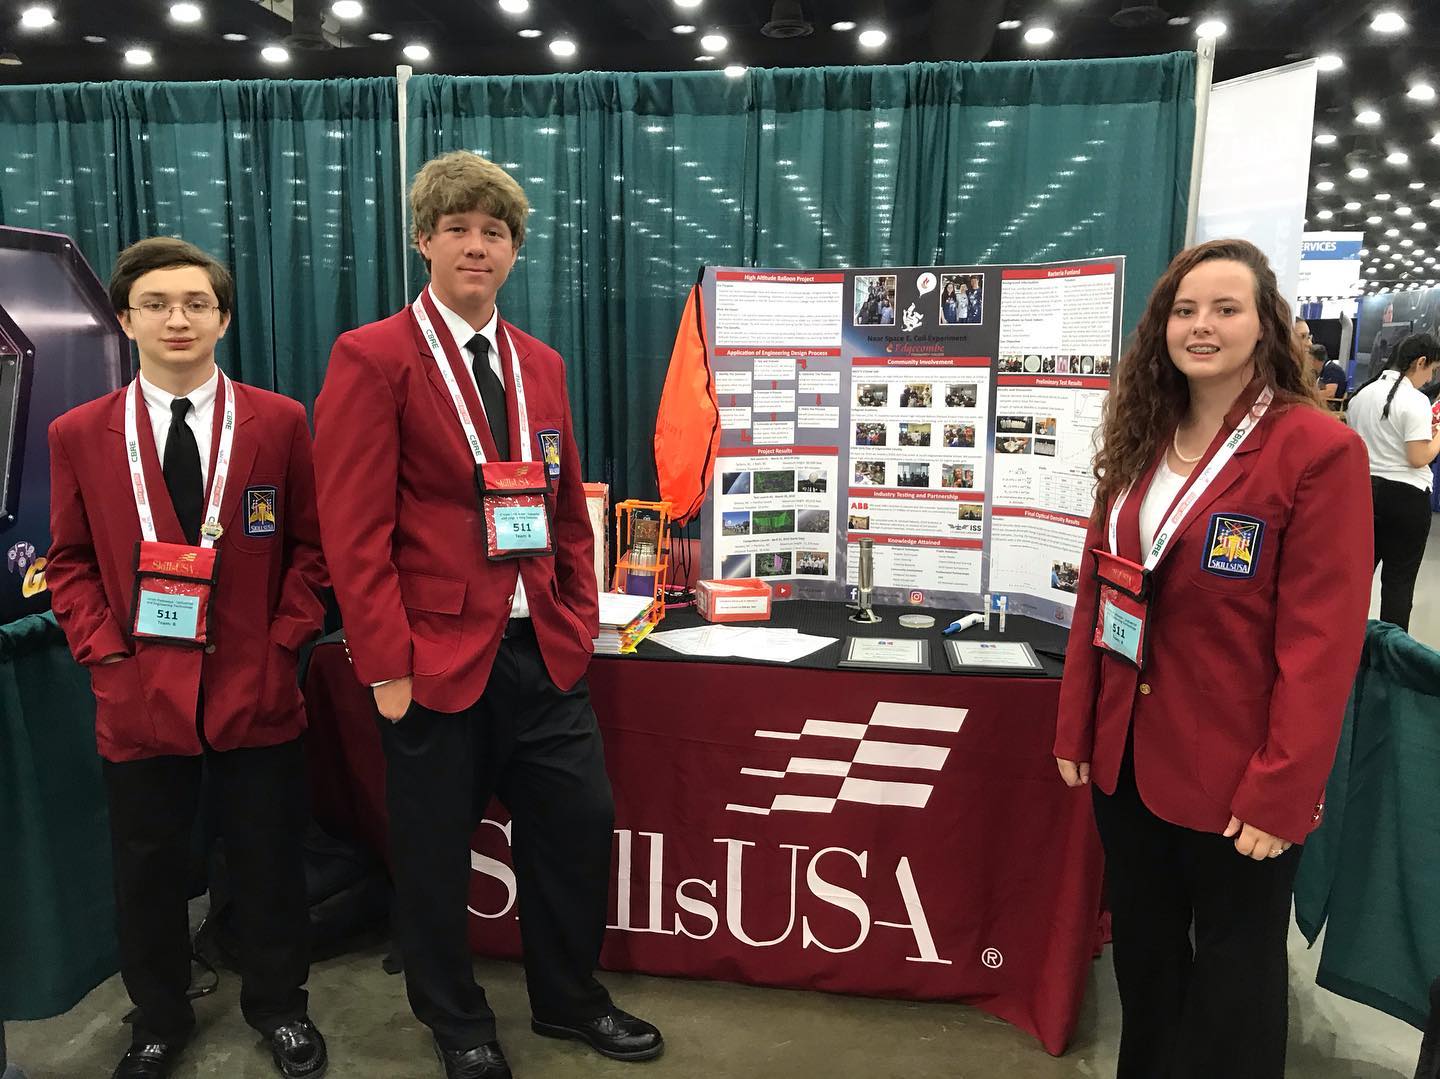 Edgecombe COmmunity College students pose with their champion medals at their SkillsUSA booth.